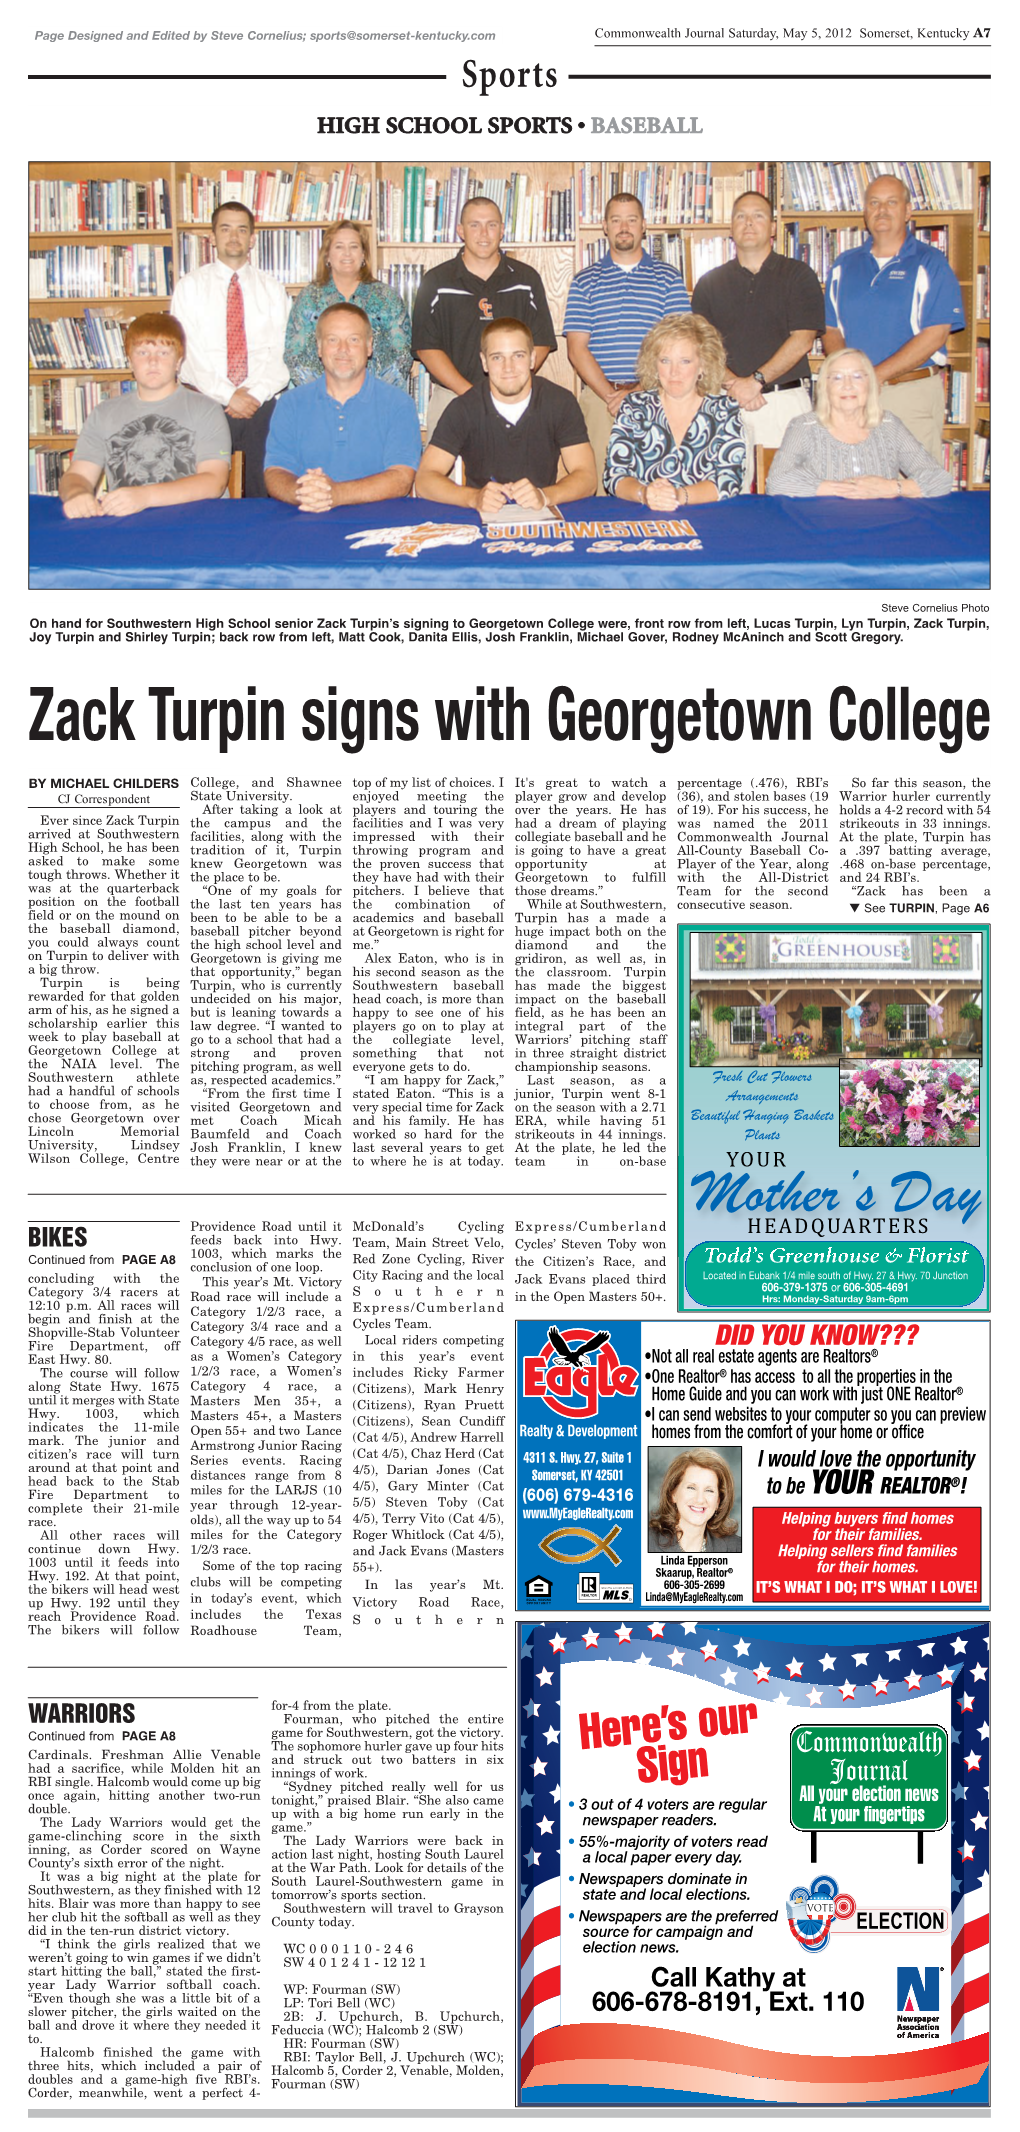 Zack Turpin Signs with Georgetown College